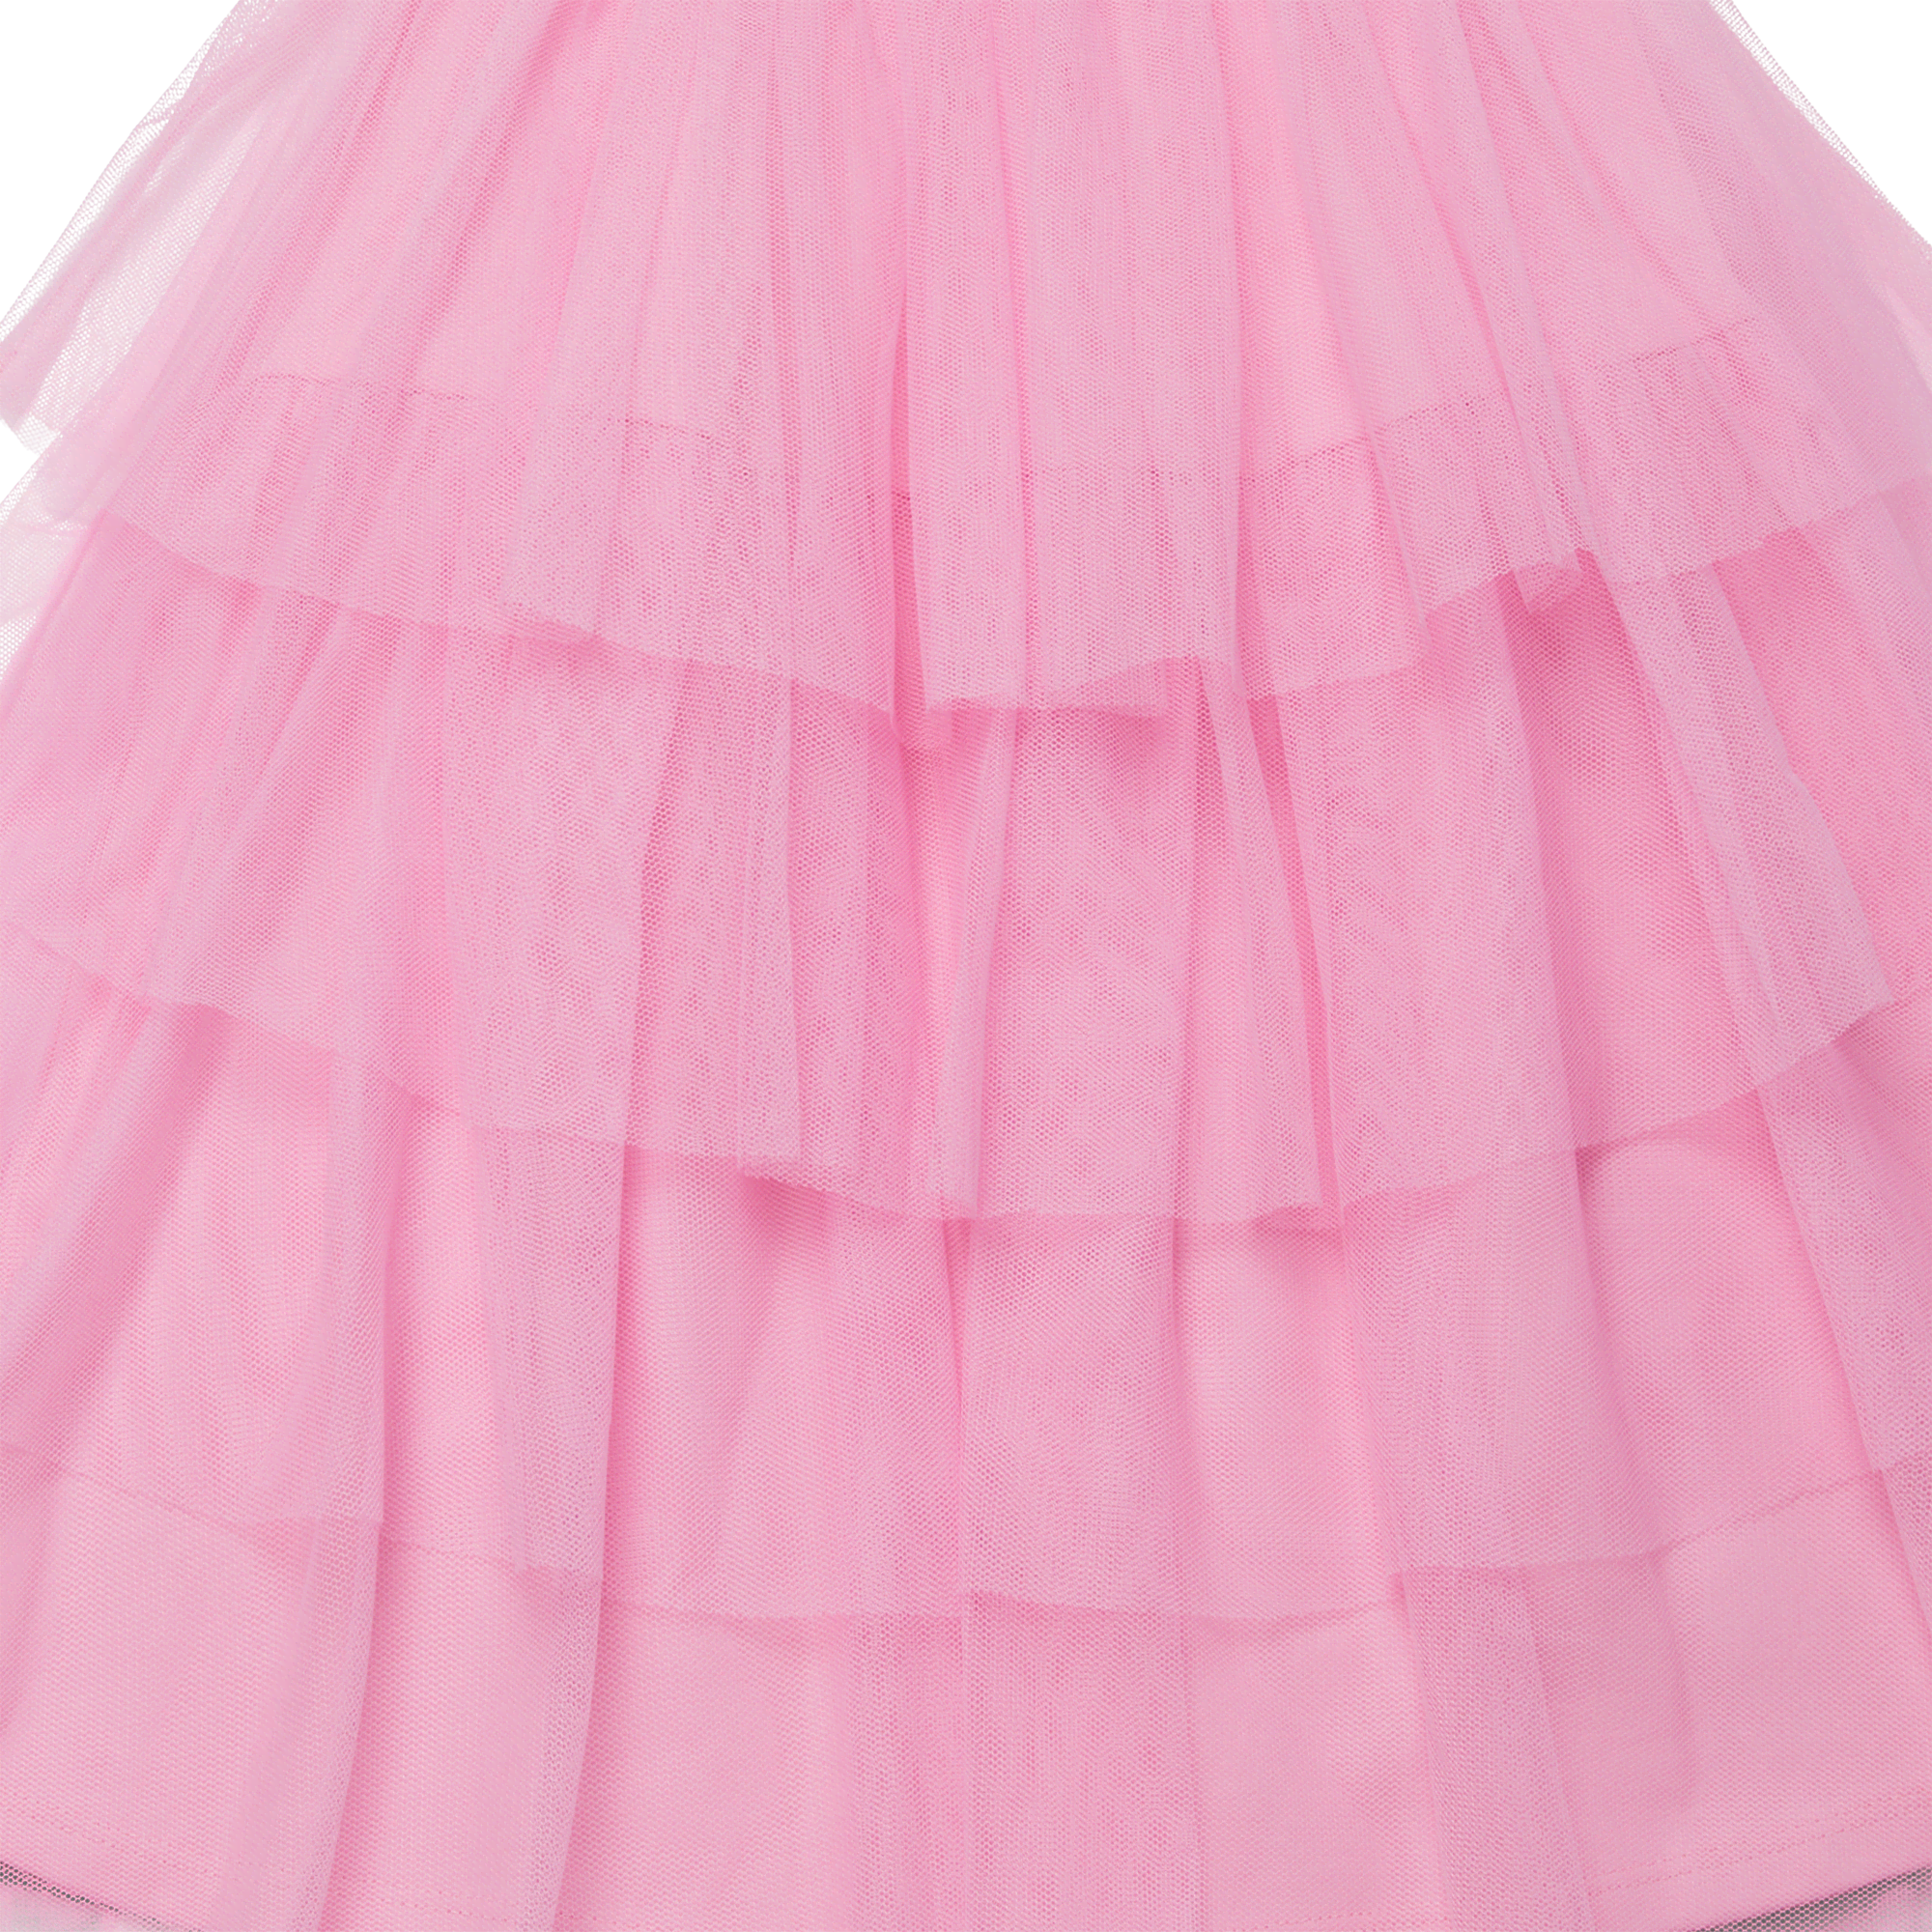 American Girl® x Something Navy Tiers of Joy Pink Skirt for Girls